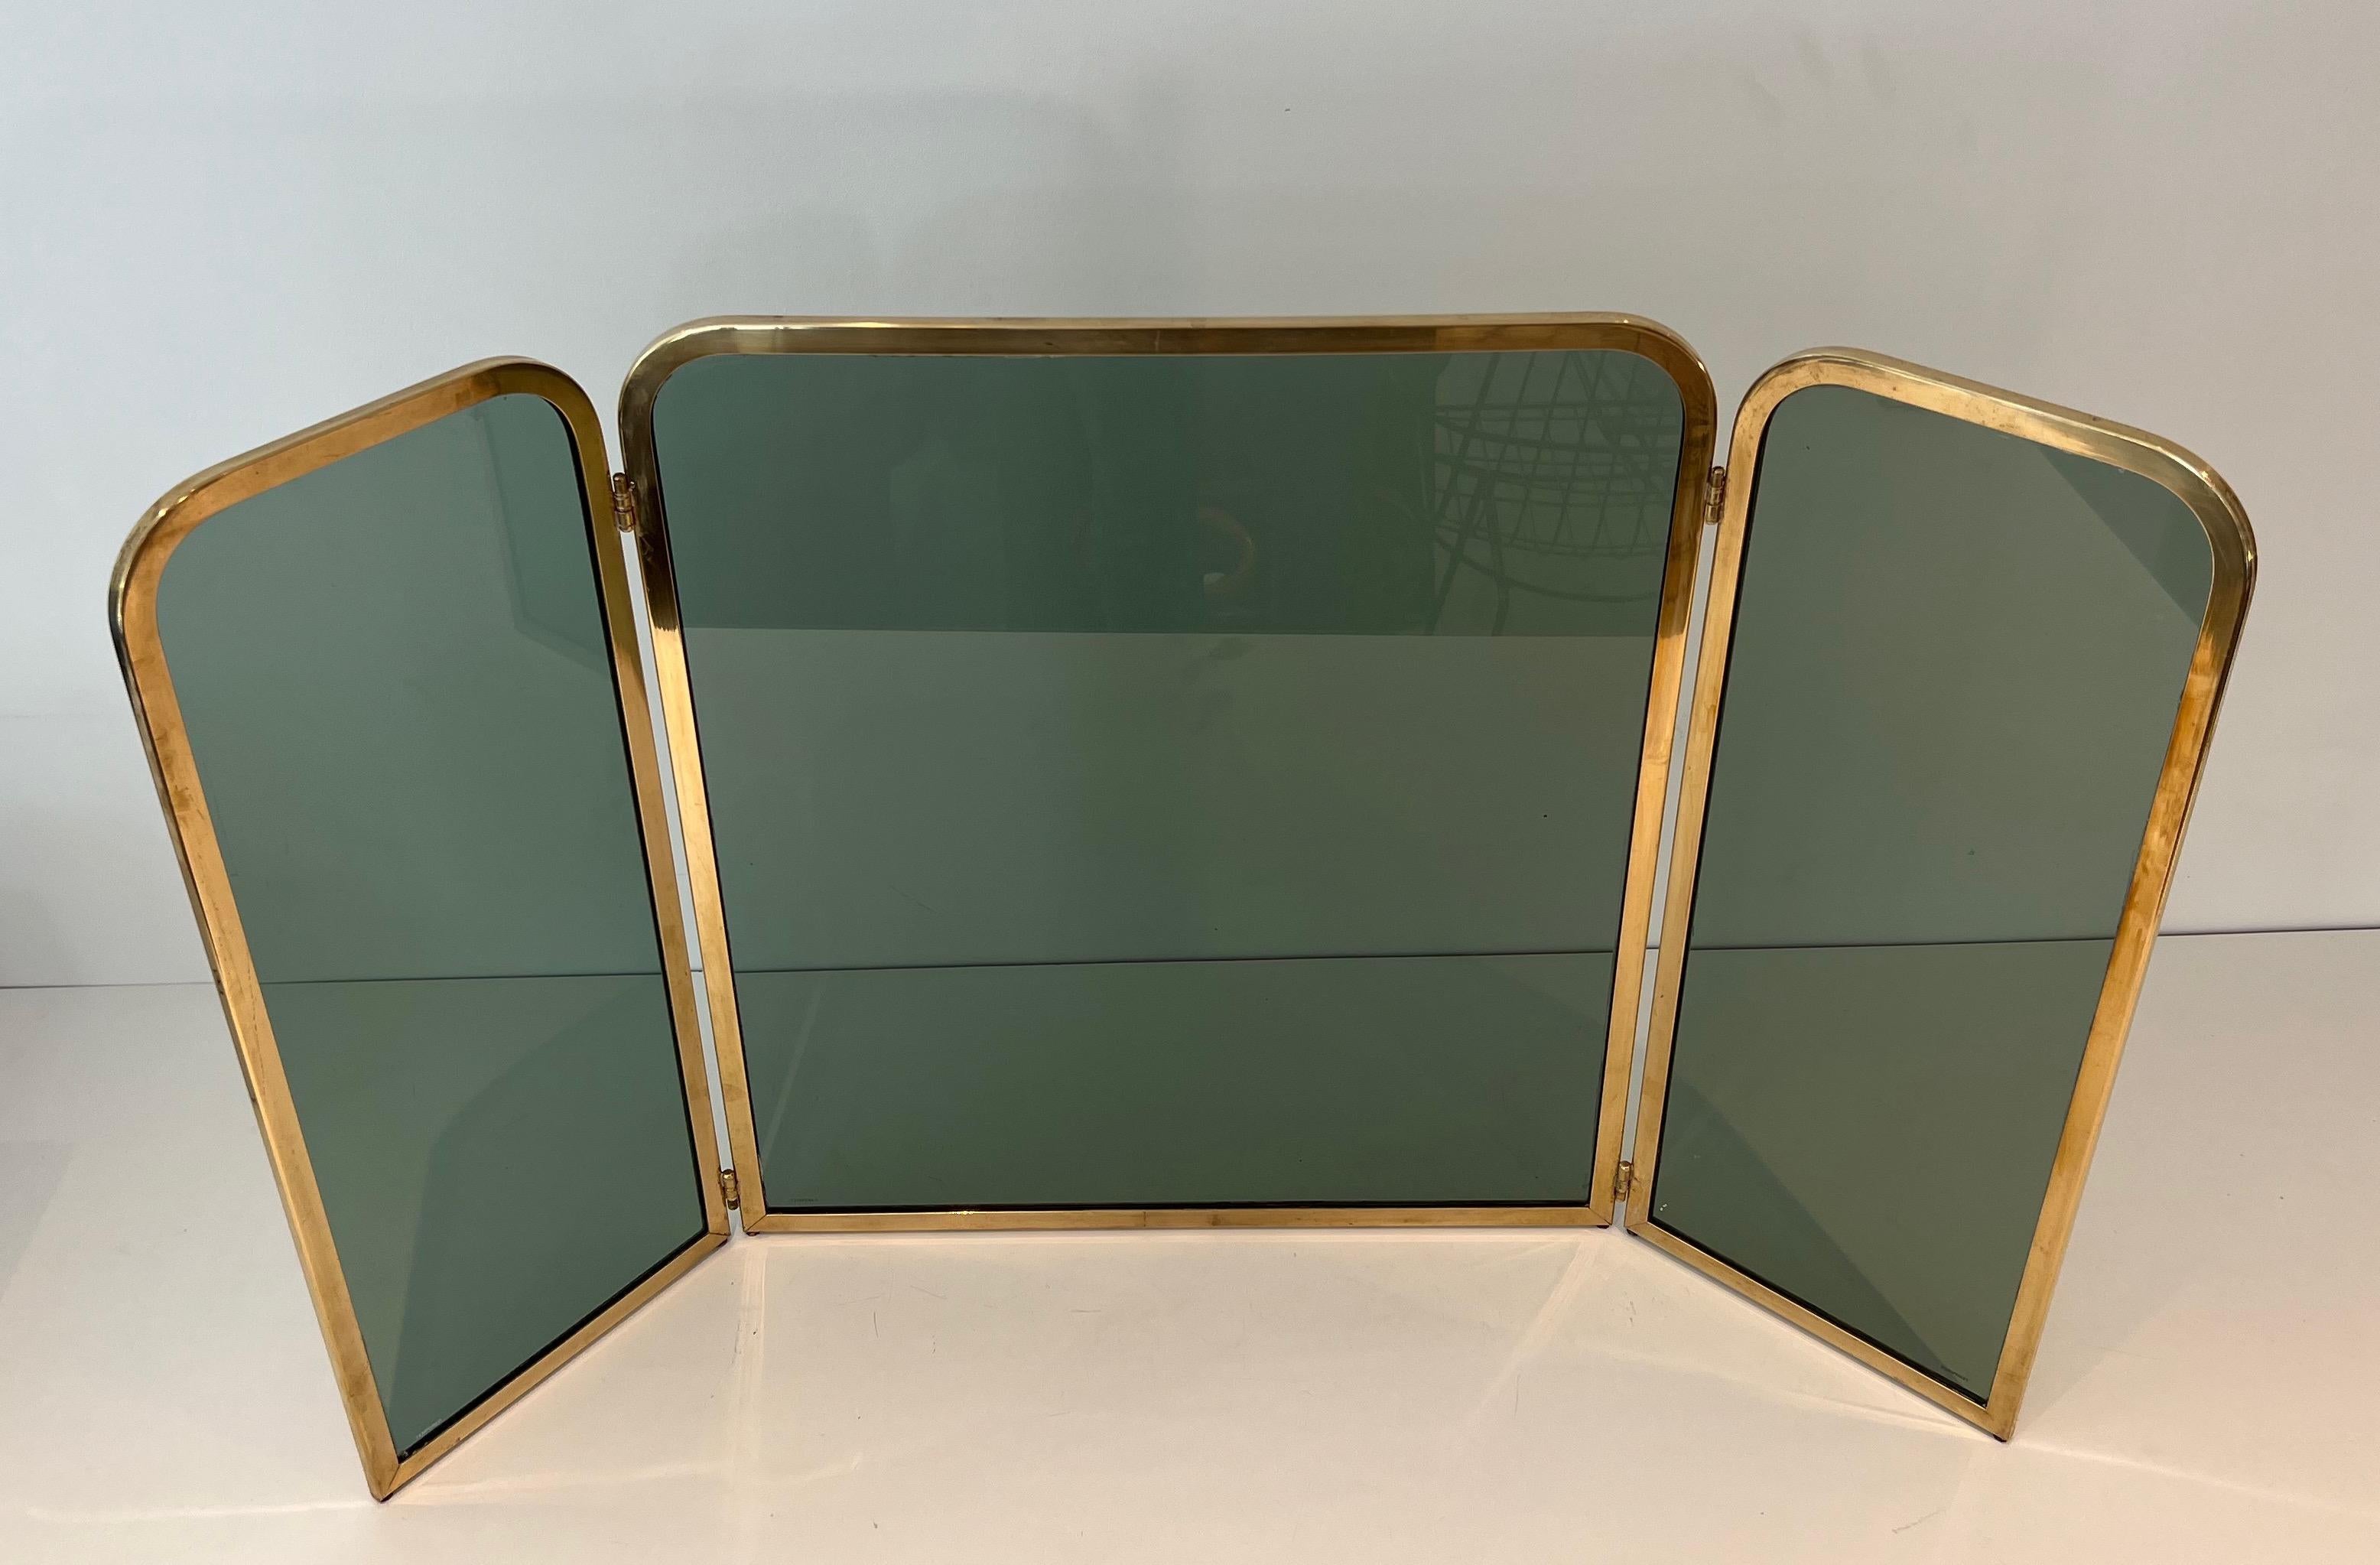 French Fireplace Screen Made of 3 Greenish Glass Panels Surrounded by a Brass Frame For Sale